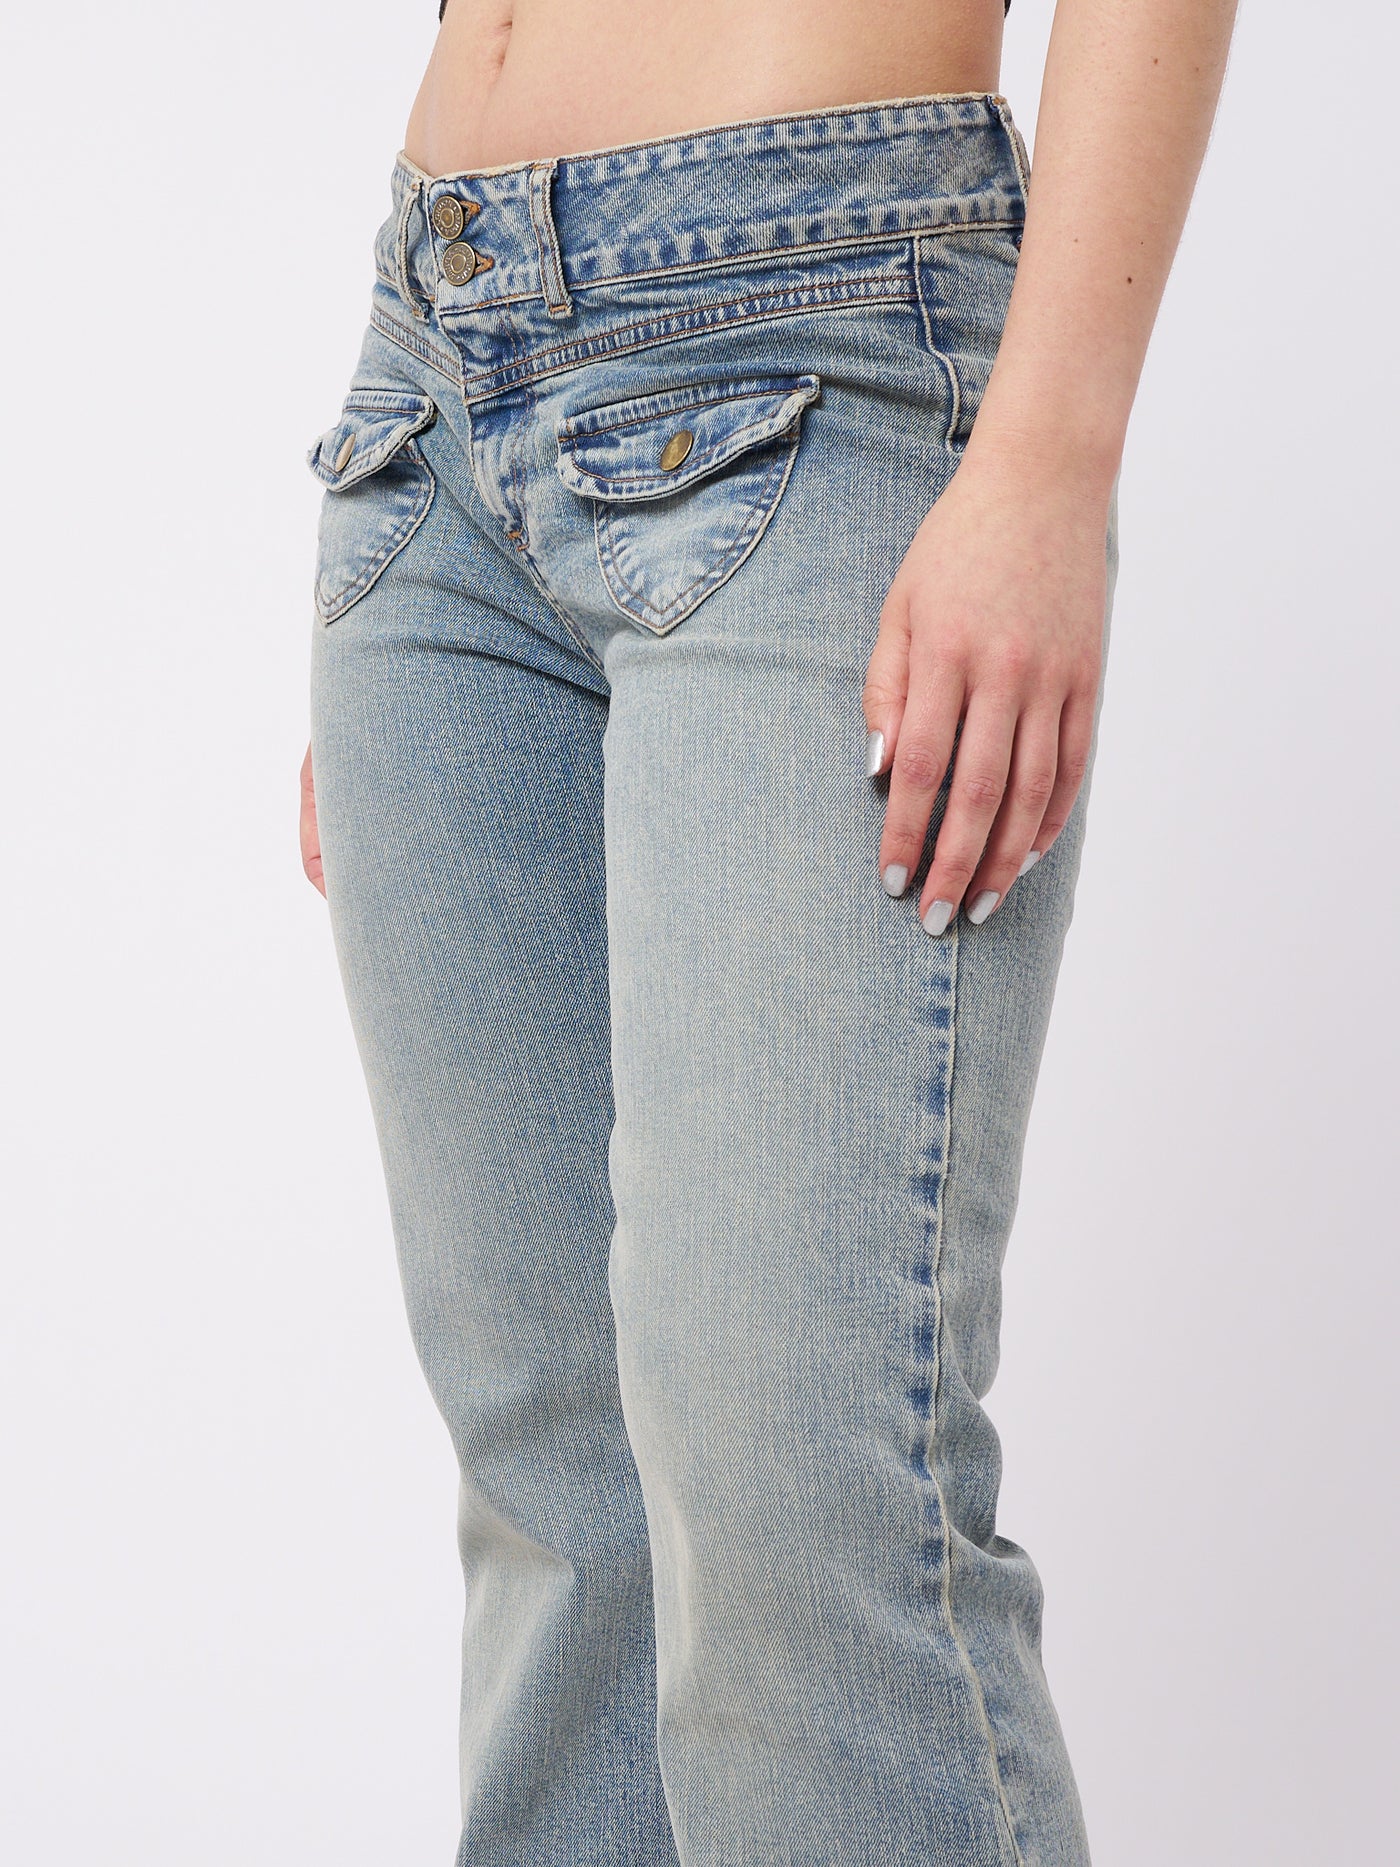 Over-dyed flare jeans with front pockets by Minga London. Trendy and flattering fit for a fashionable and retro-inspired look.